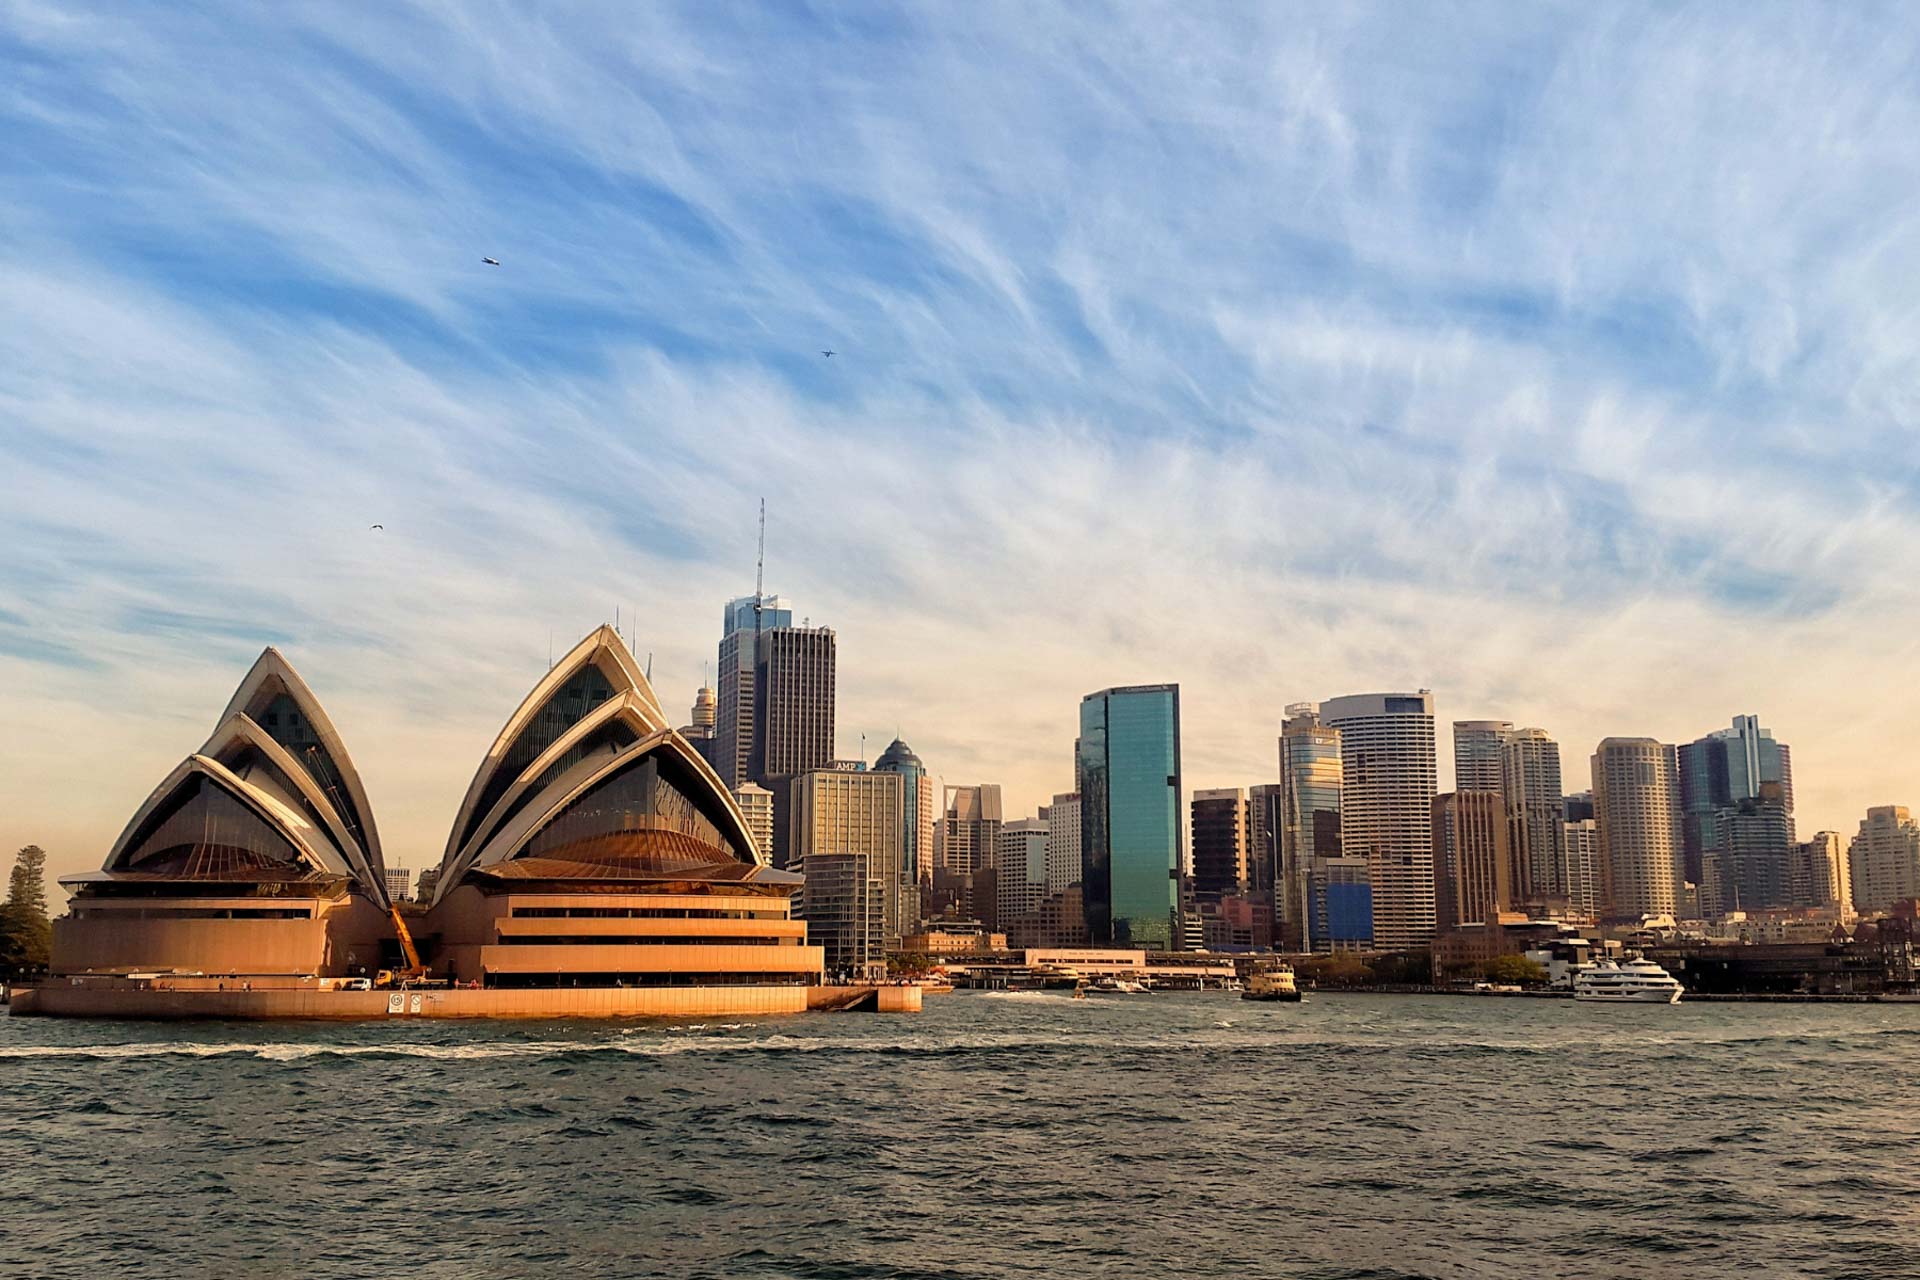 Sydney Opera House and city skyline seen from water.